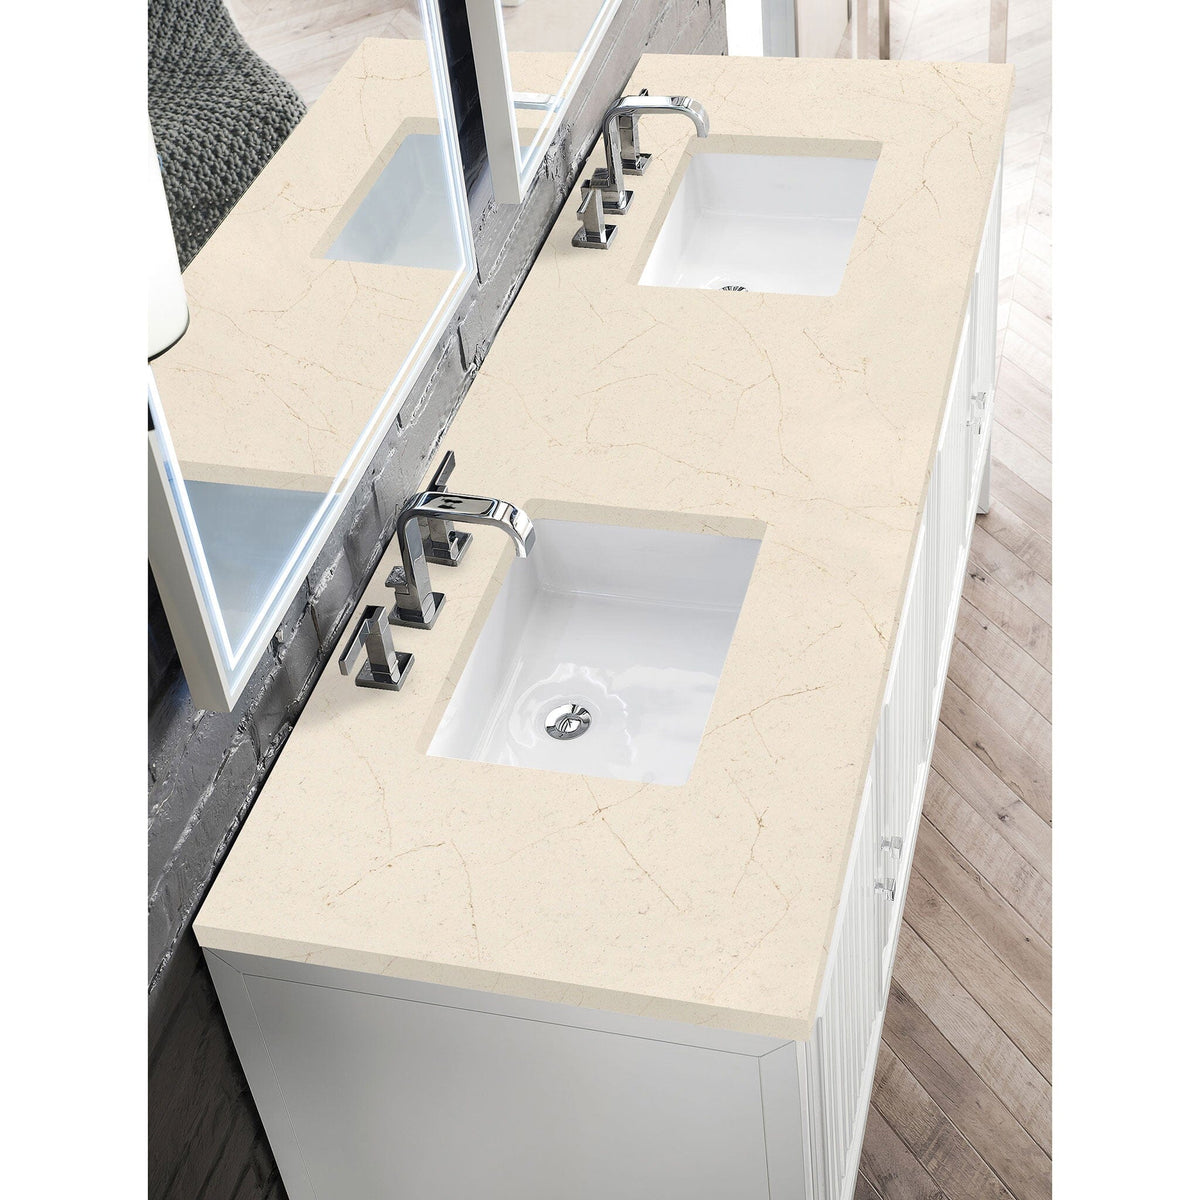 72" Athens Double Wall Mounted Bathroom Vanity, Glossy White